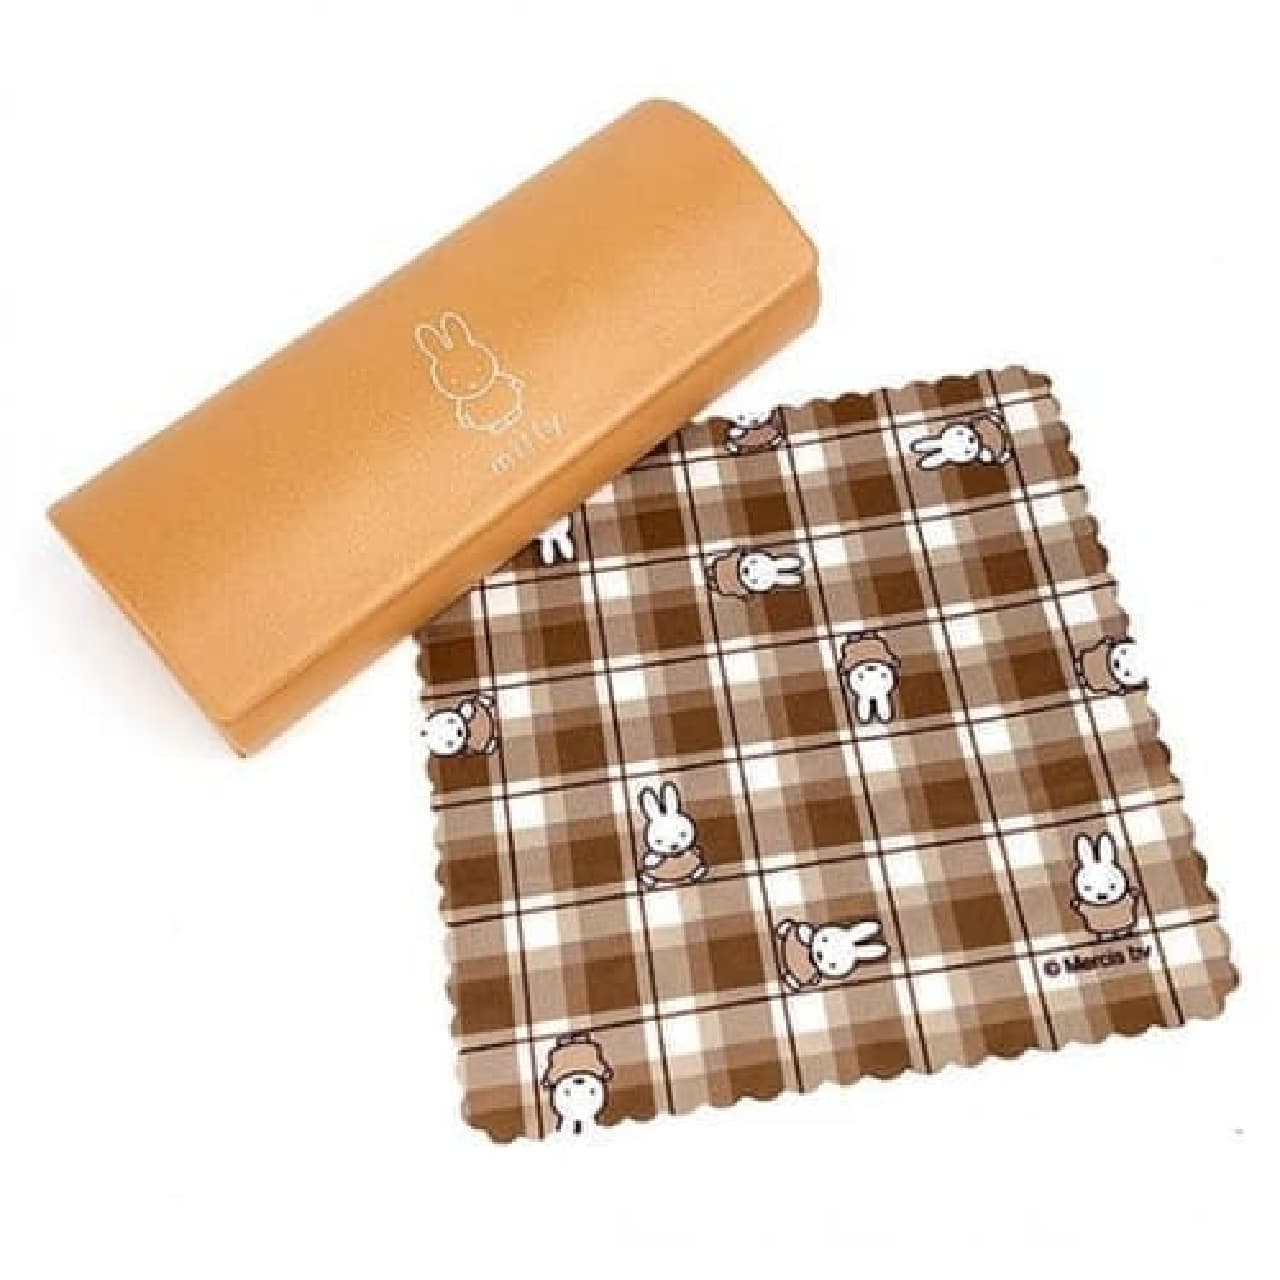 Adult-like pouch and wallet in Miffy x camel color --Also a glasses case with a cloth